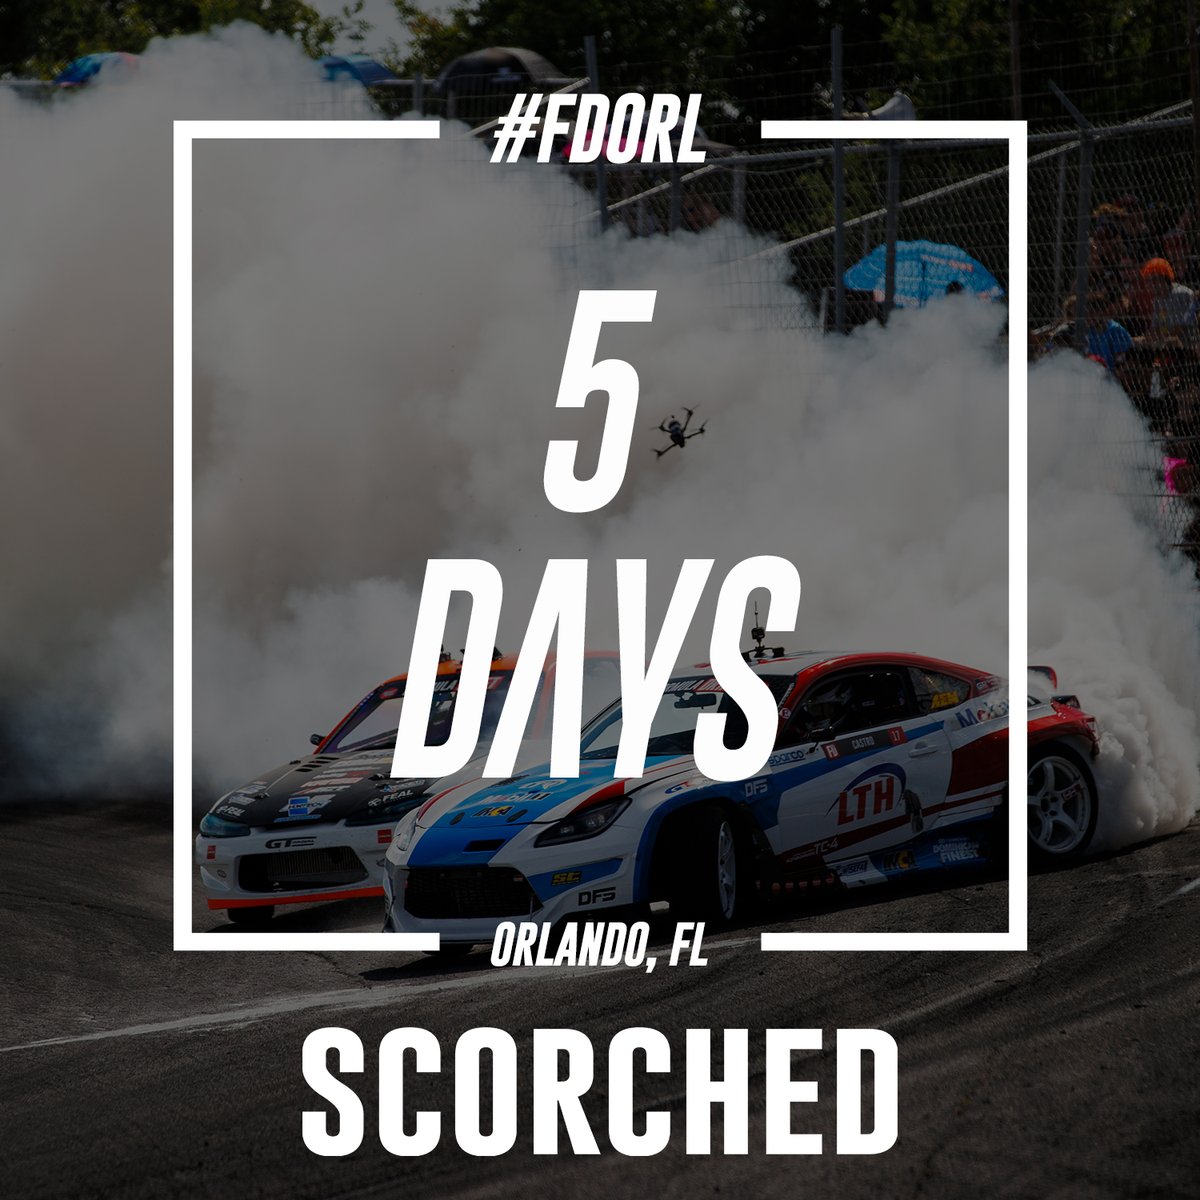 Orlando, we’re just 5 days away from the action! 🔥

#FormulaD #FormulaDRIFT #FDORL